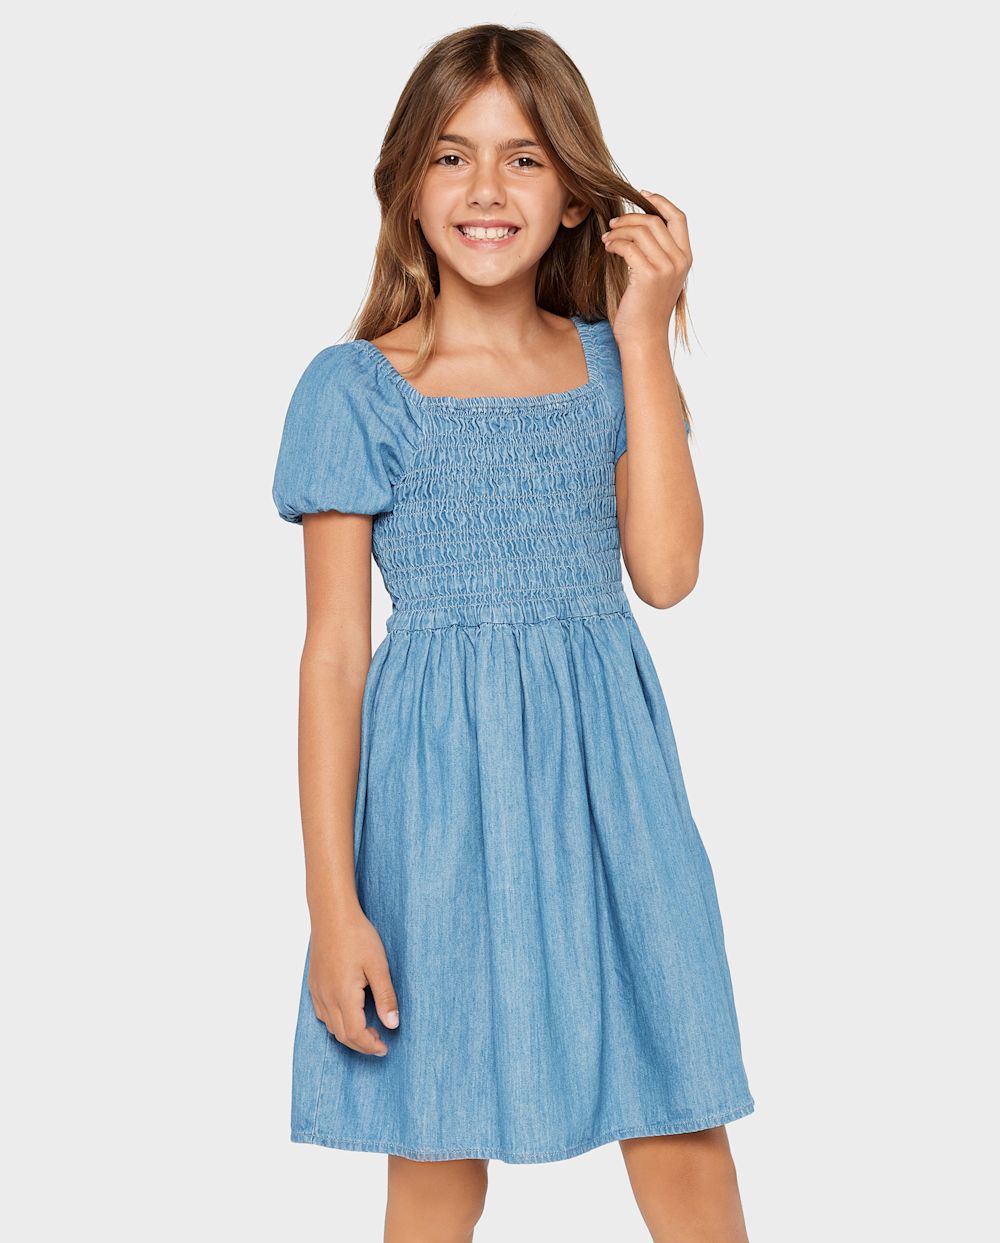 Girls Puff Sleeves Short Sleeves Sleeves Above the Knee Smocked Square Neck Dress